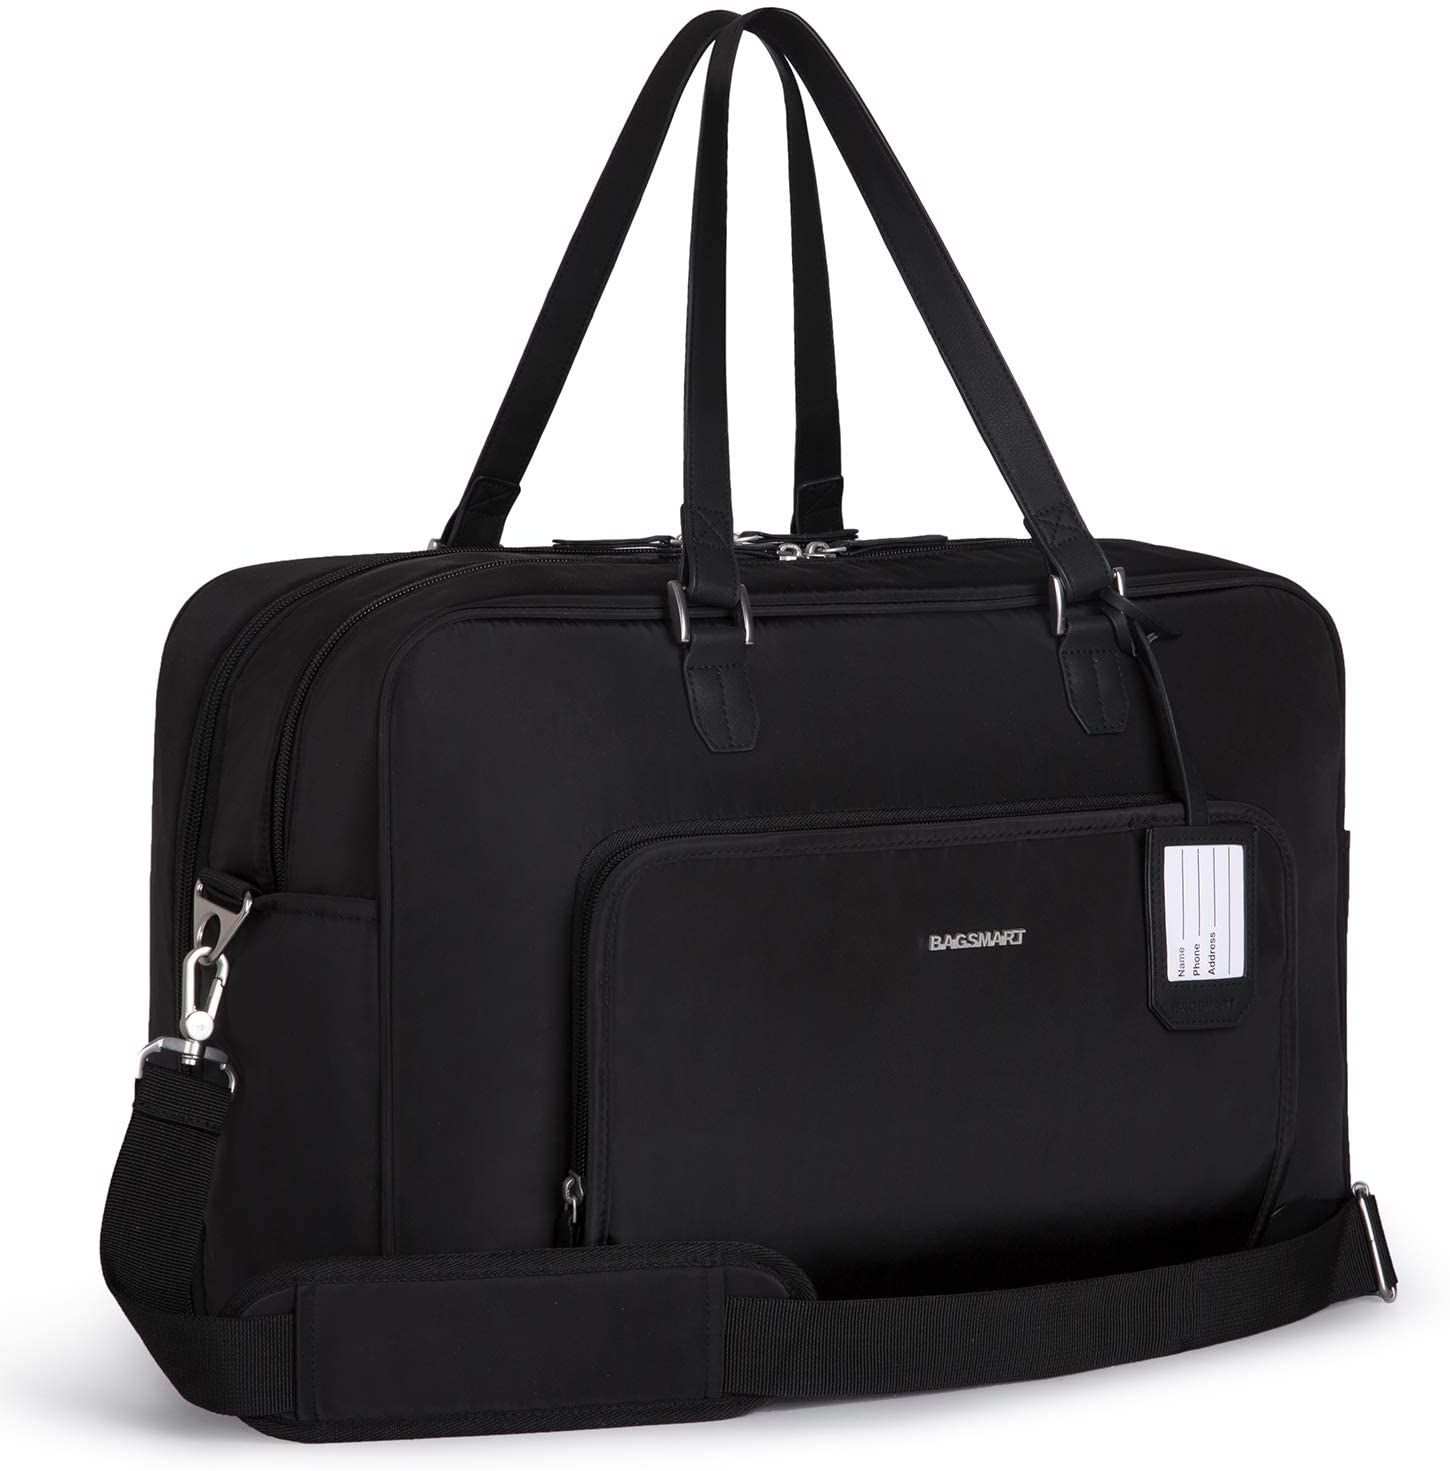 What Are The Best Travel Bags With Trolley Sleeve?, 56% OFF